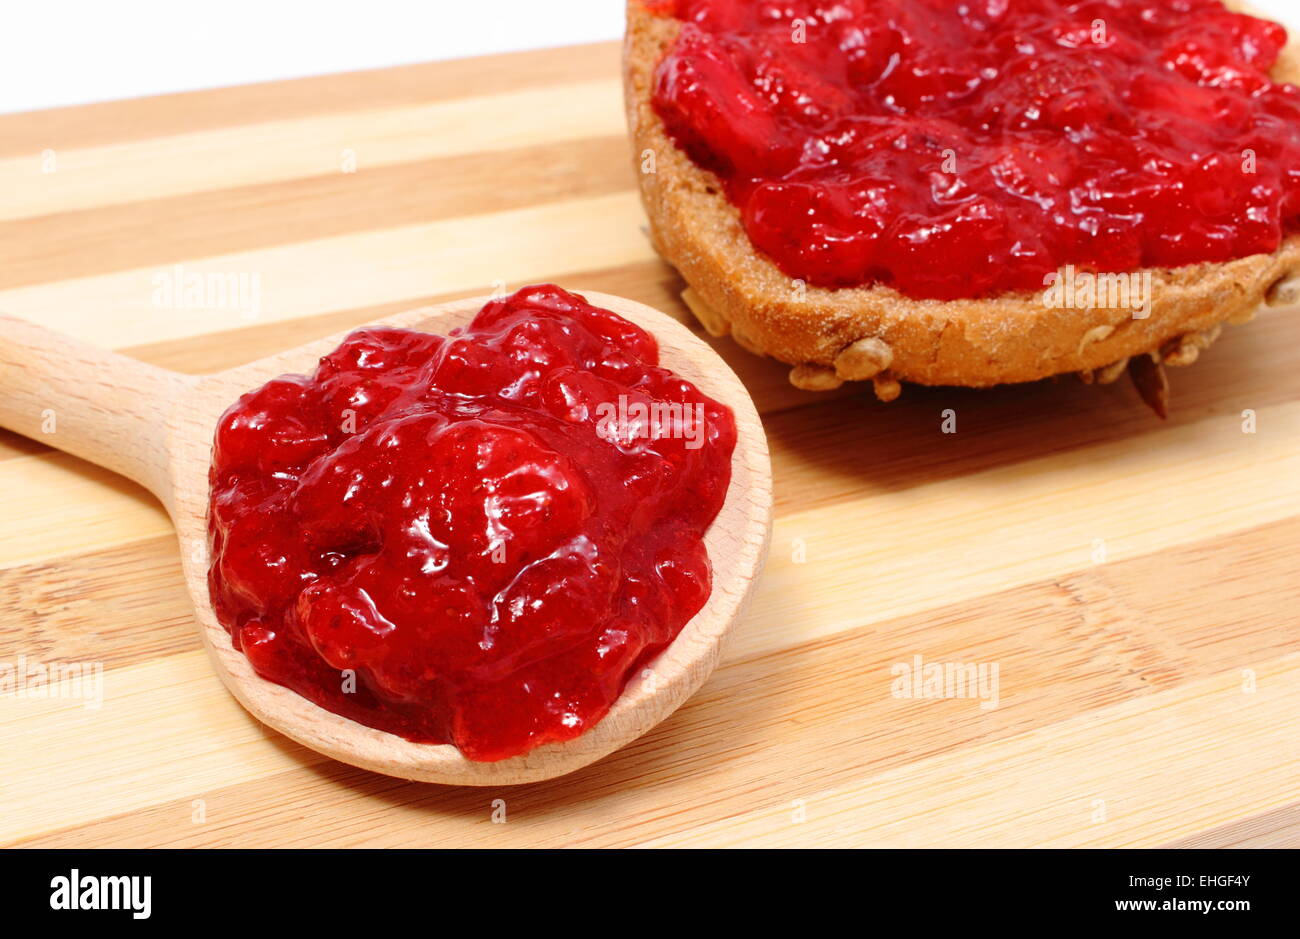 Homemade strawberry jam on wooden spoon and portion of whole wheat bread lying on wooden cutting board, healthy breakfast Stock Photo